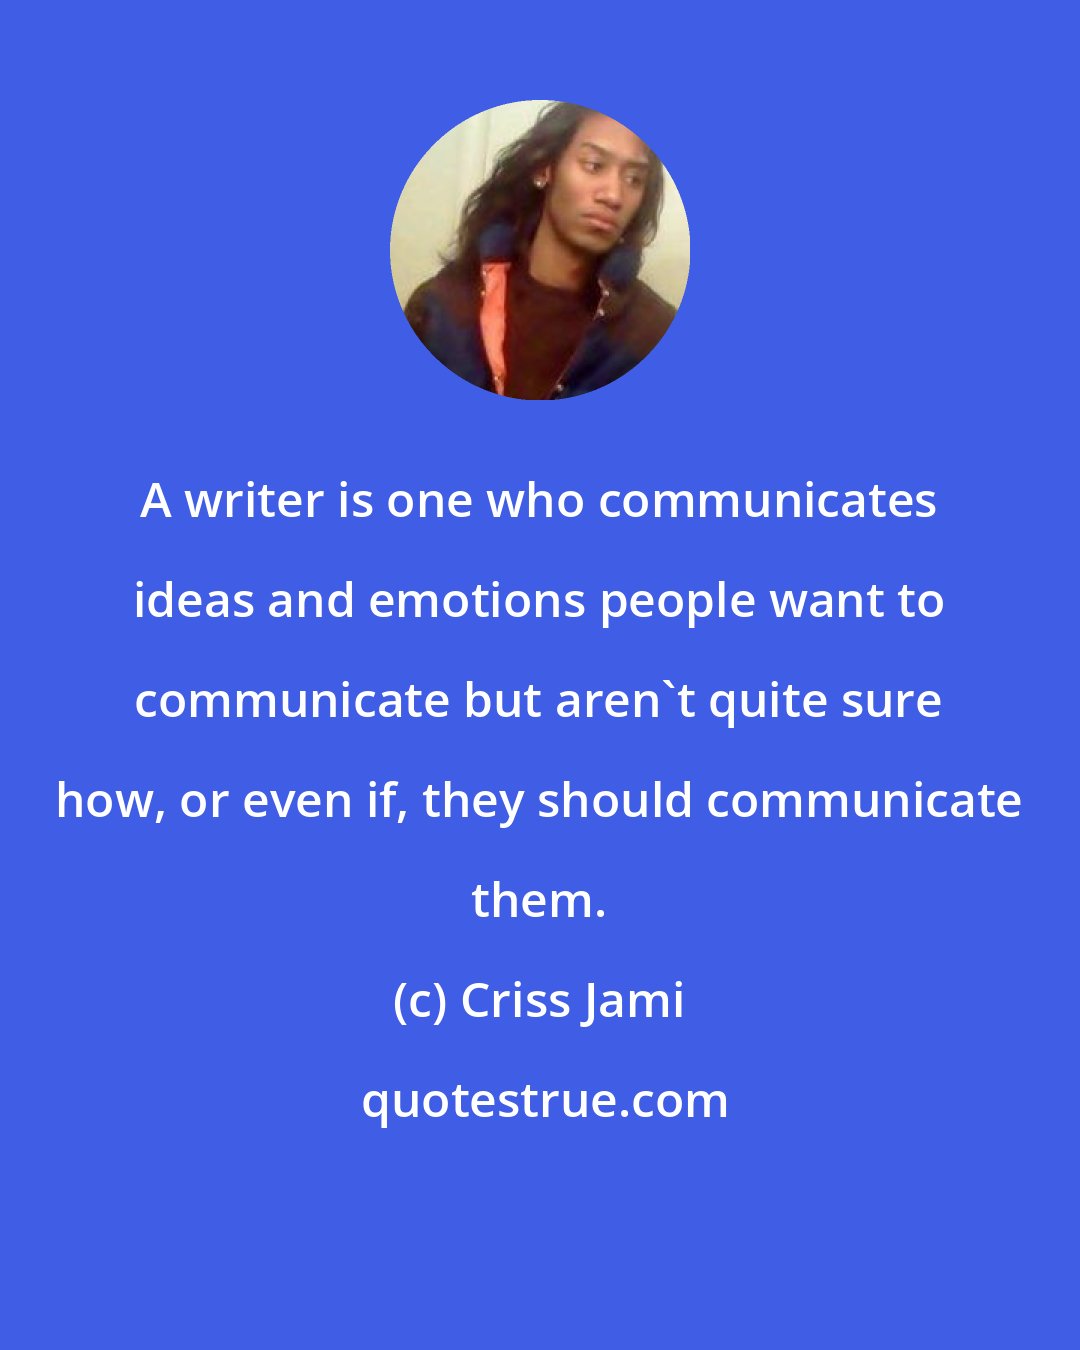 Criss Jami: A writer is one who communicates ideas and emotions people want to communicate but aren't quite sure how, or even if, they should communicate them.